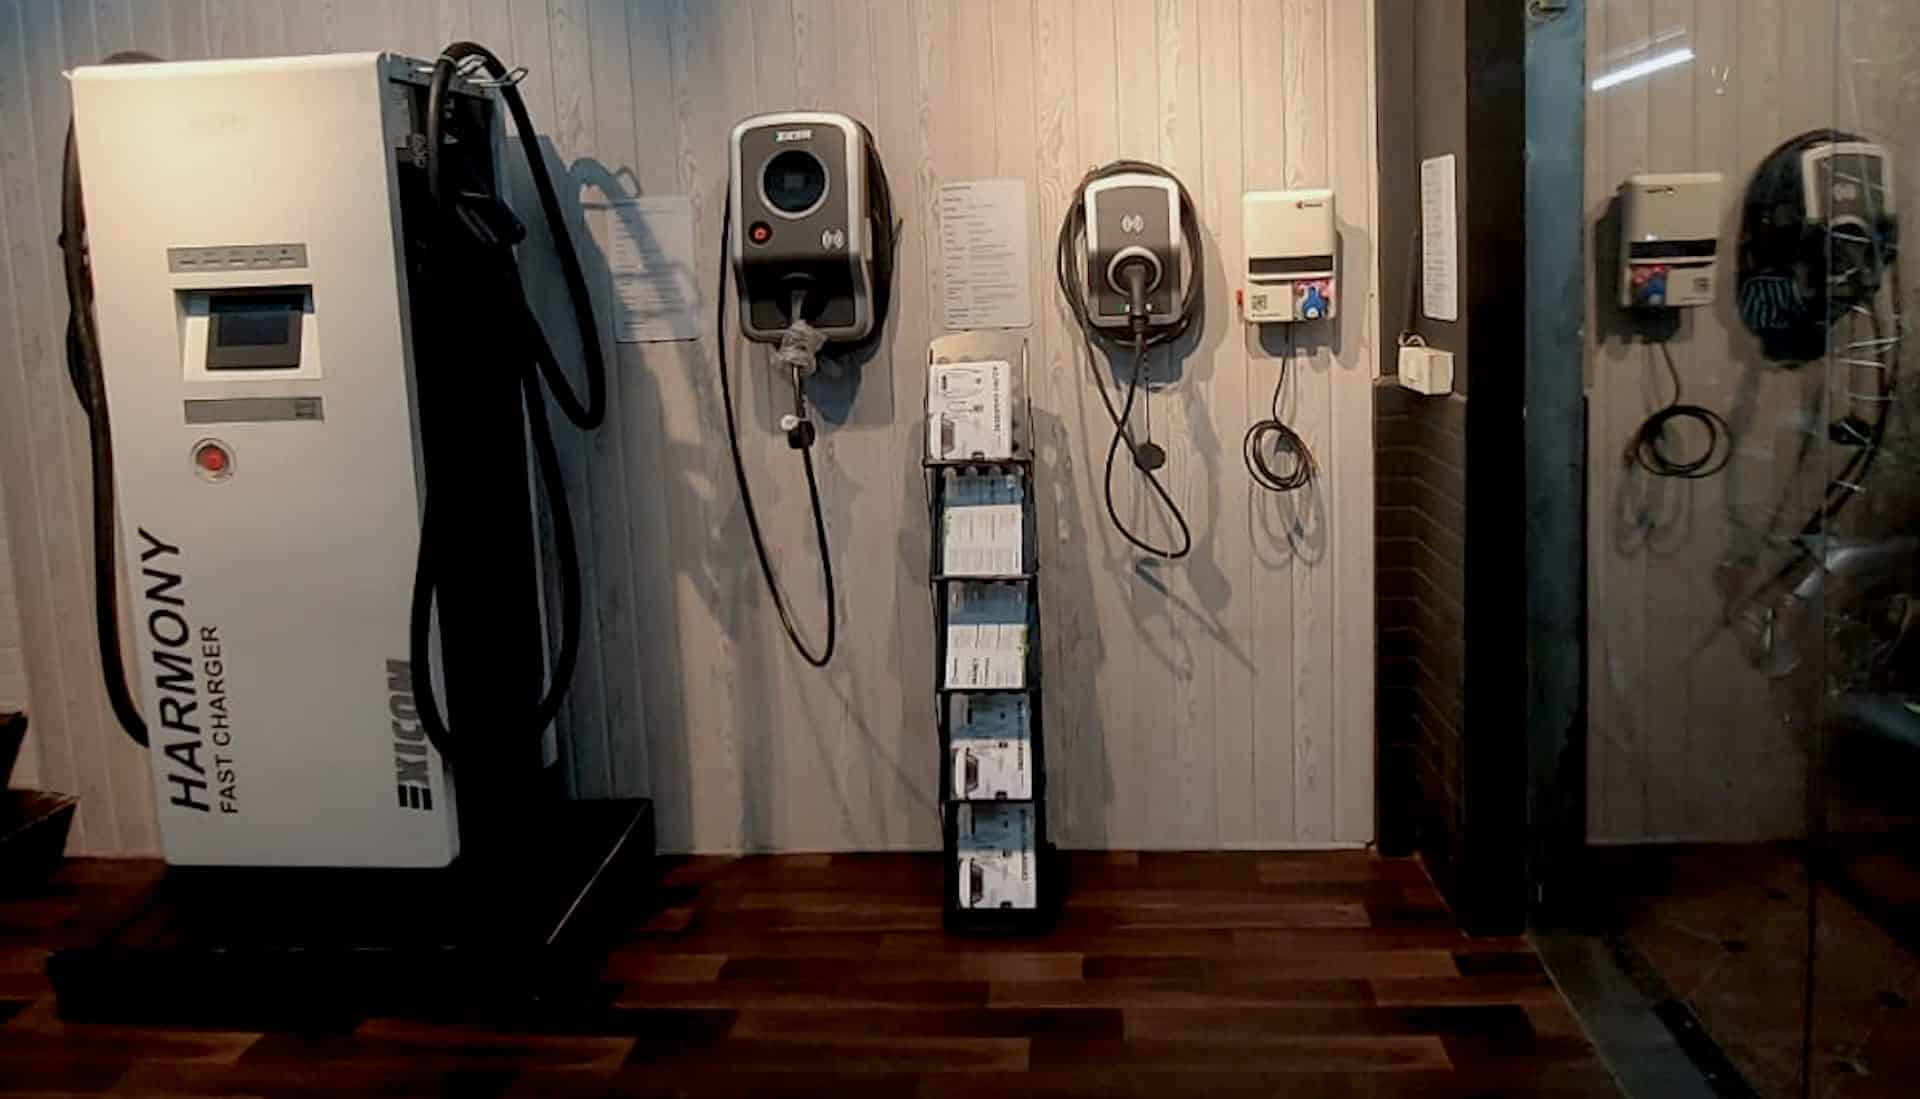 Mumbai gets a first-of-its-kind New EV Charger Store by The Sustainer